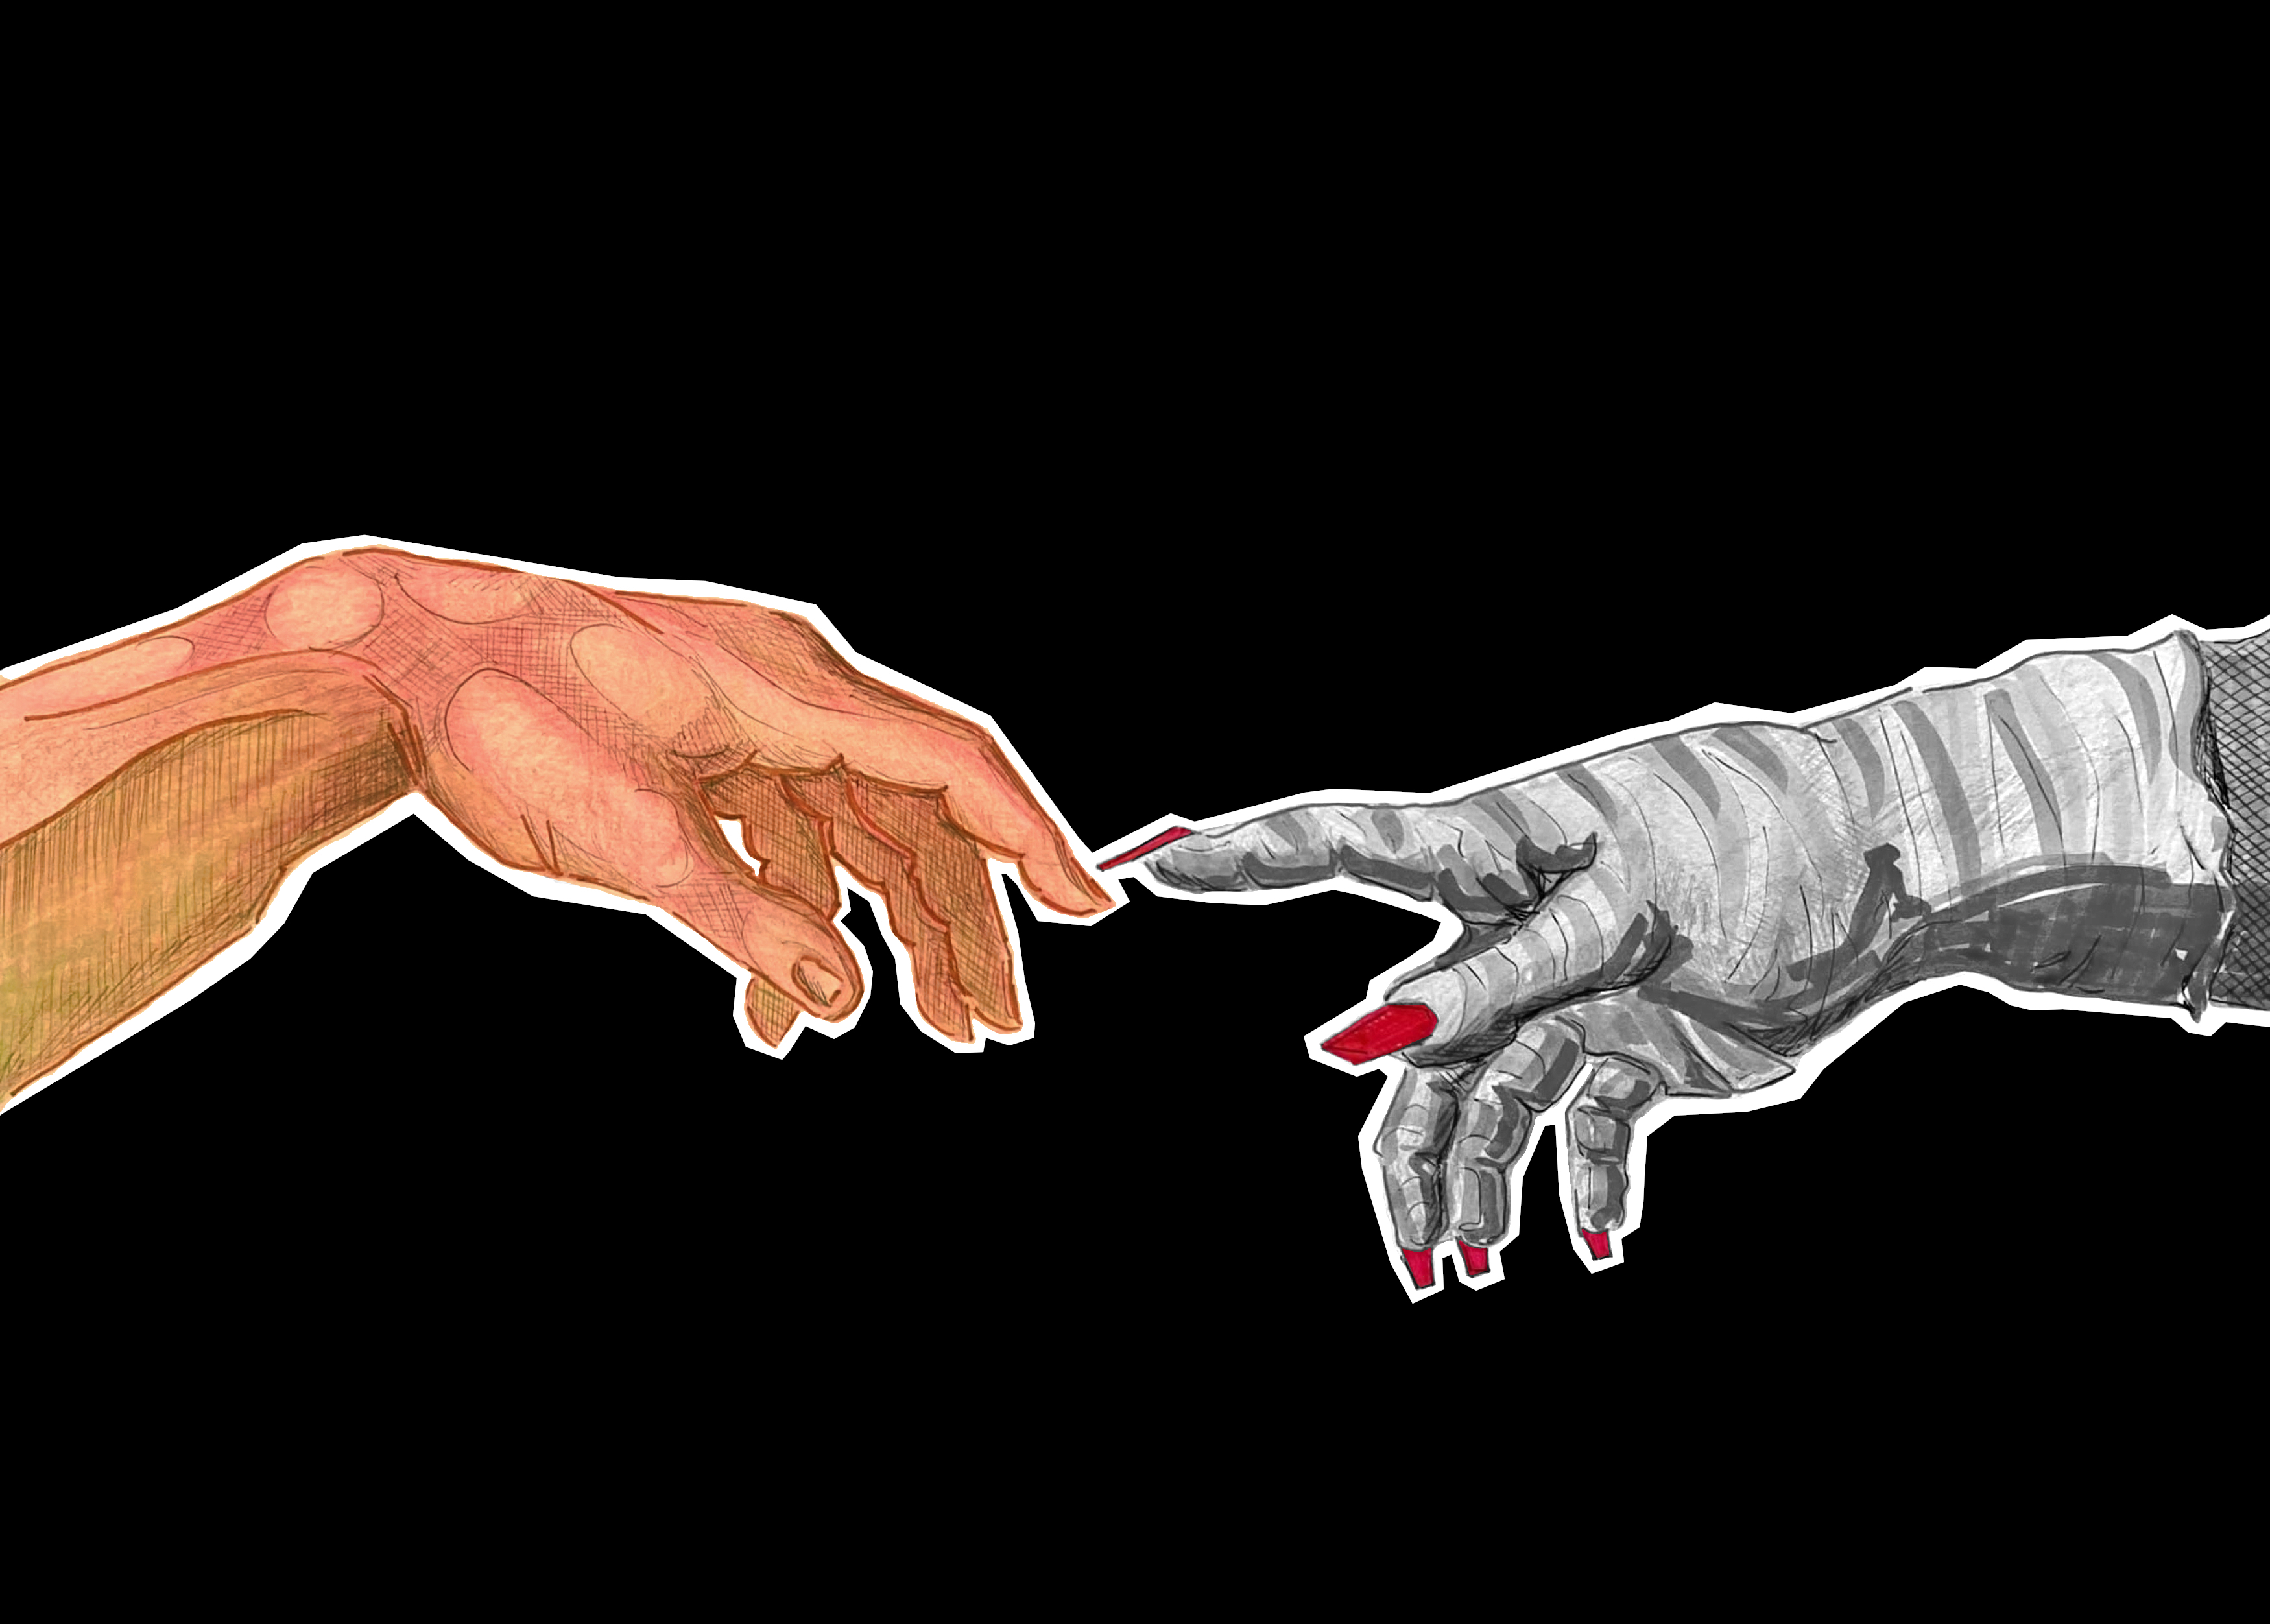 Two hands reaching out to touch one another in the style of 'The Creation of Adam'. One orange hand has short nails, the other black and white hand has a stripey glove and long nails in the style of the costumes in the musical Cats.